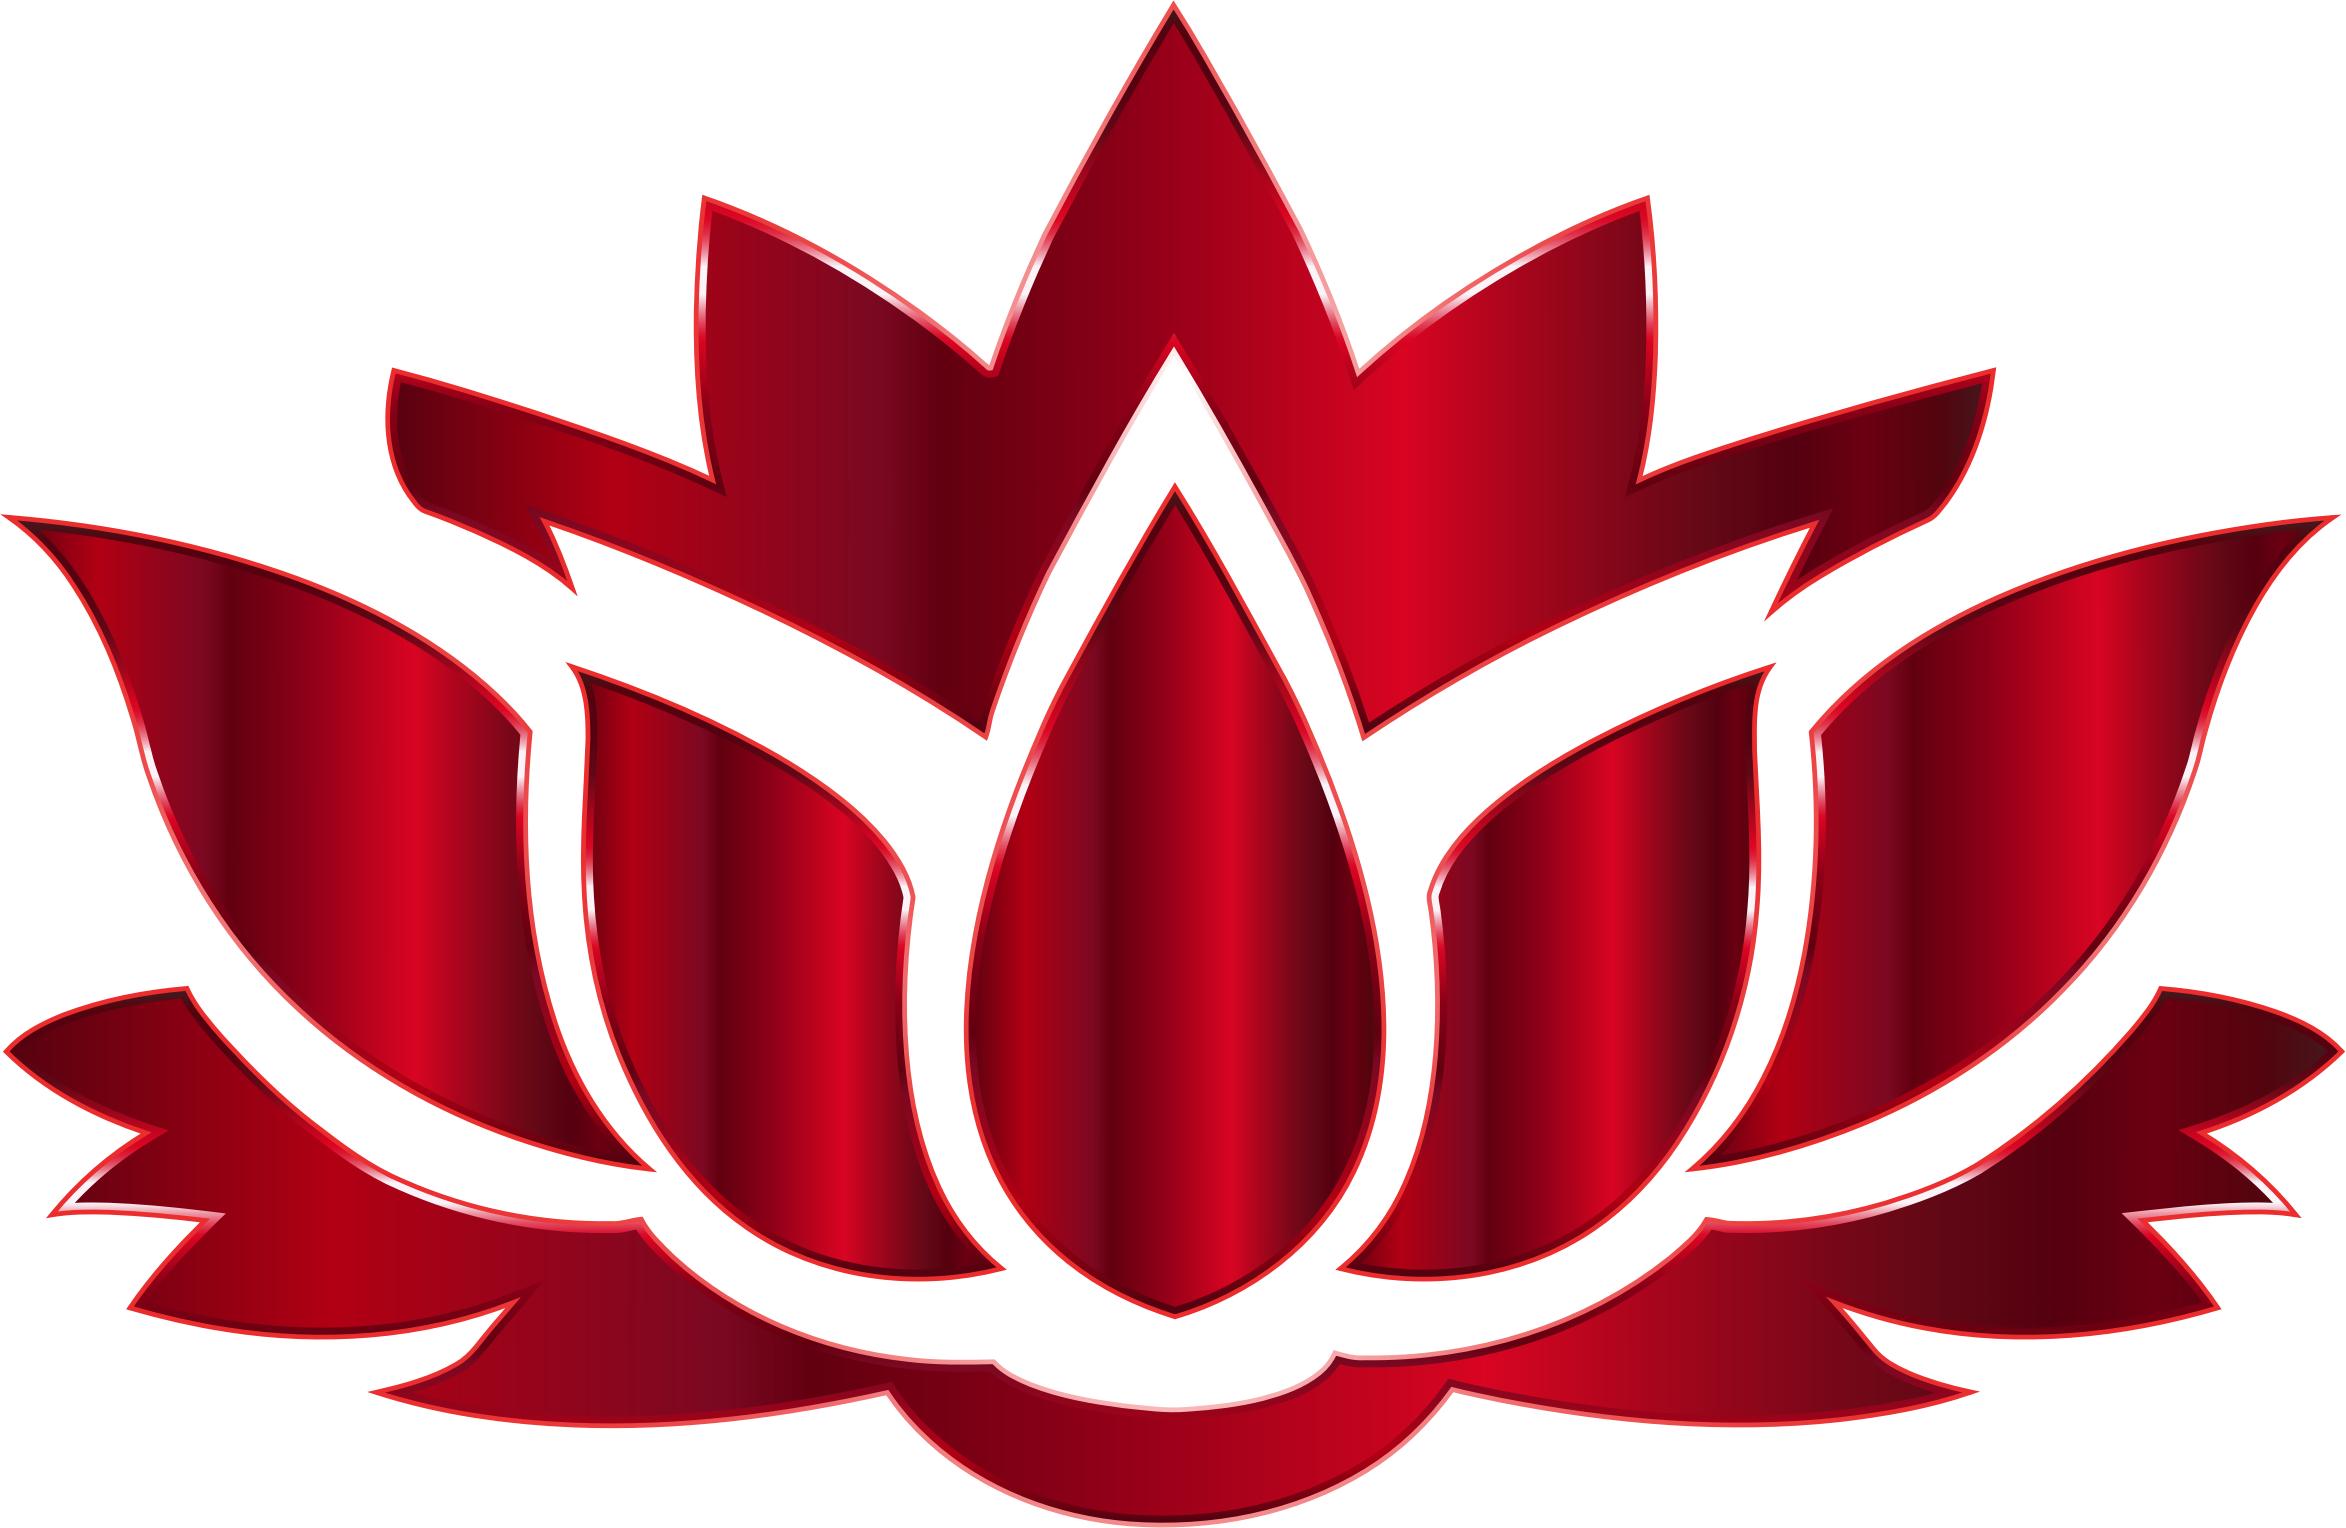 Vermillion Lotus Flower Silhouette No Background PNG icons